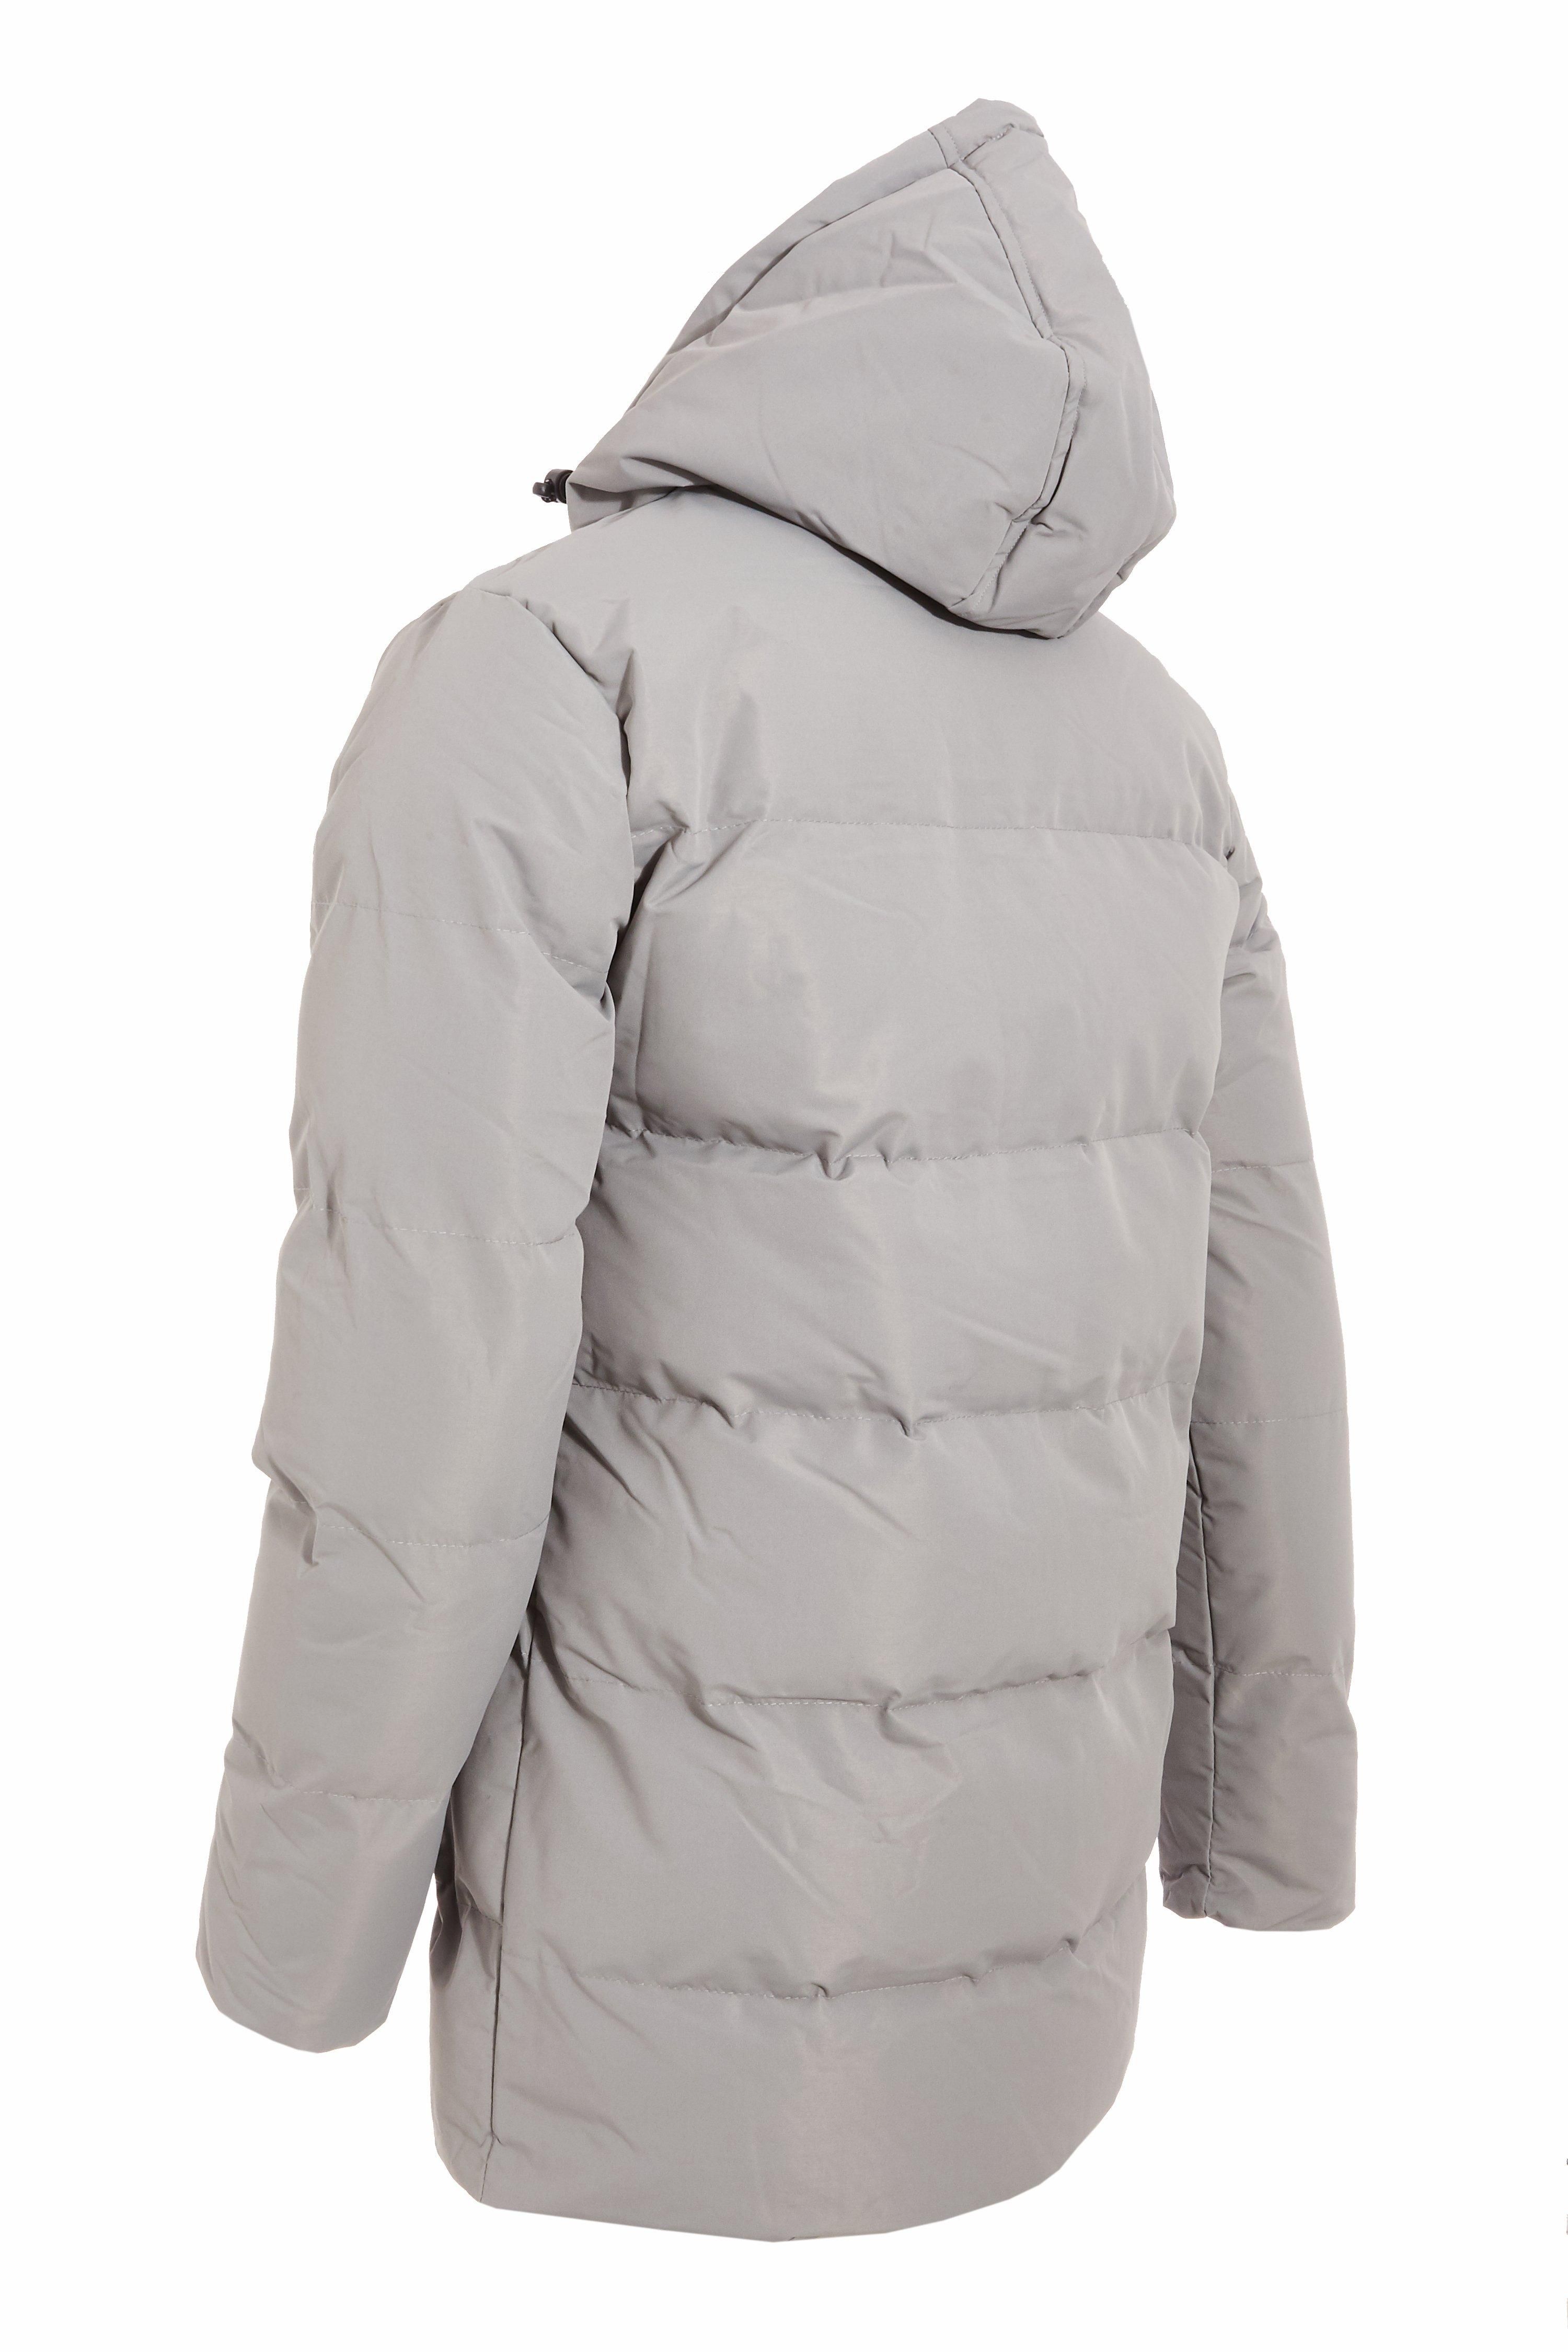 Parka Jacket  	Matte Finish  	Hooded with Draw-cord  	Zip Through Fastening  	Fuctional Pockets  	Padded  	Internal Pockets